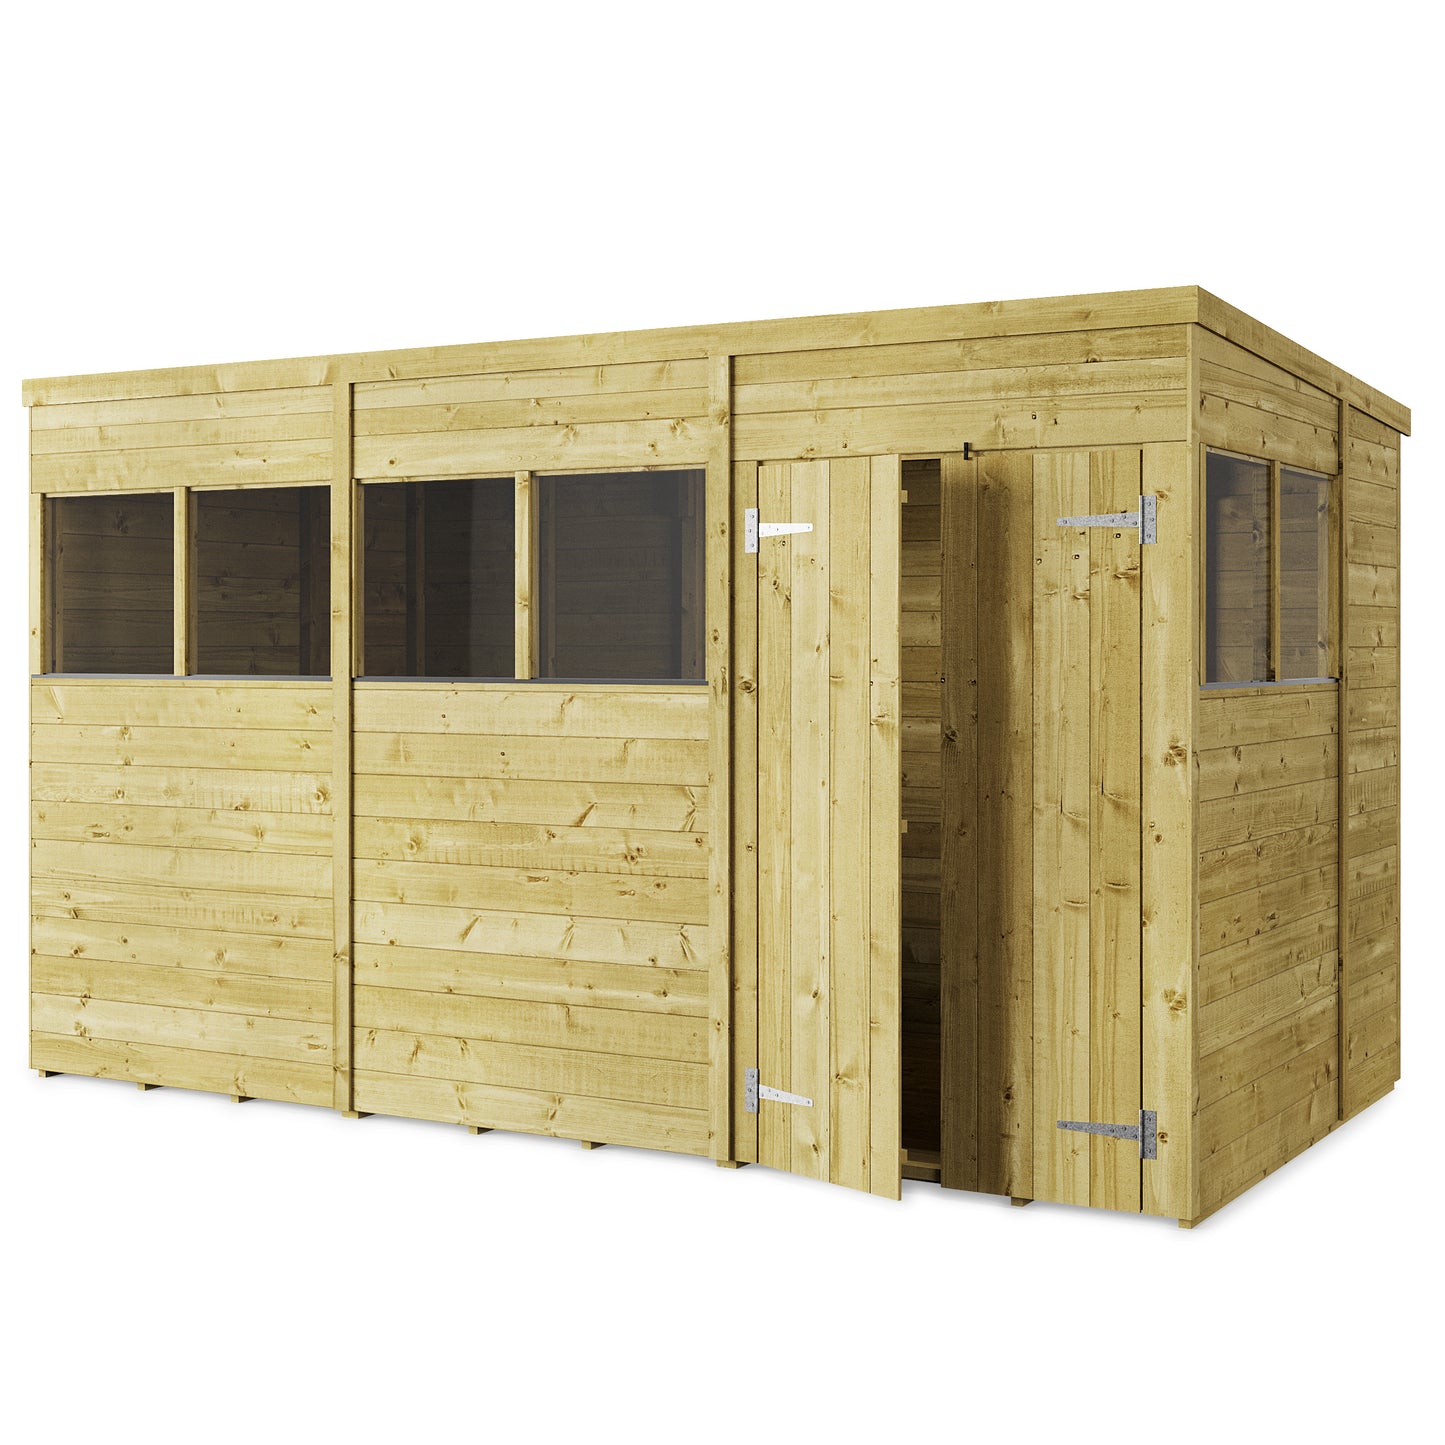 Store More 12 x 6 Tongue and Groove Pent Shed Windowed - Premium Garden